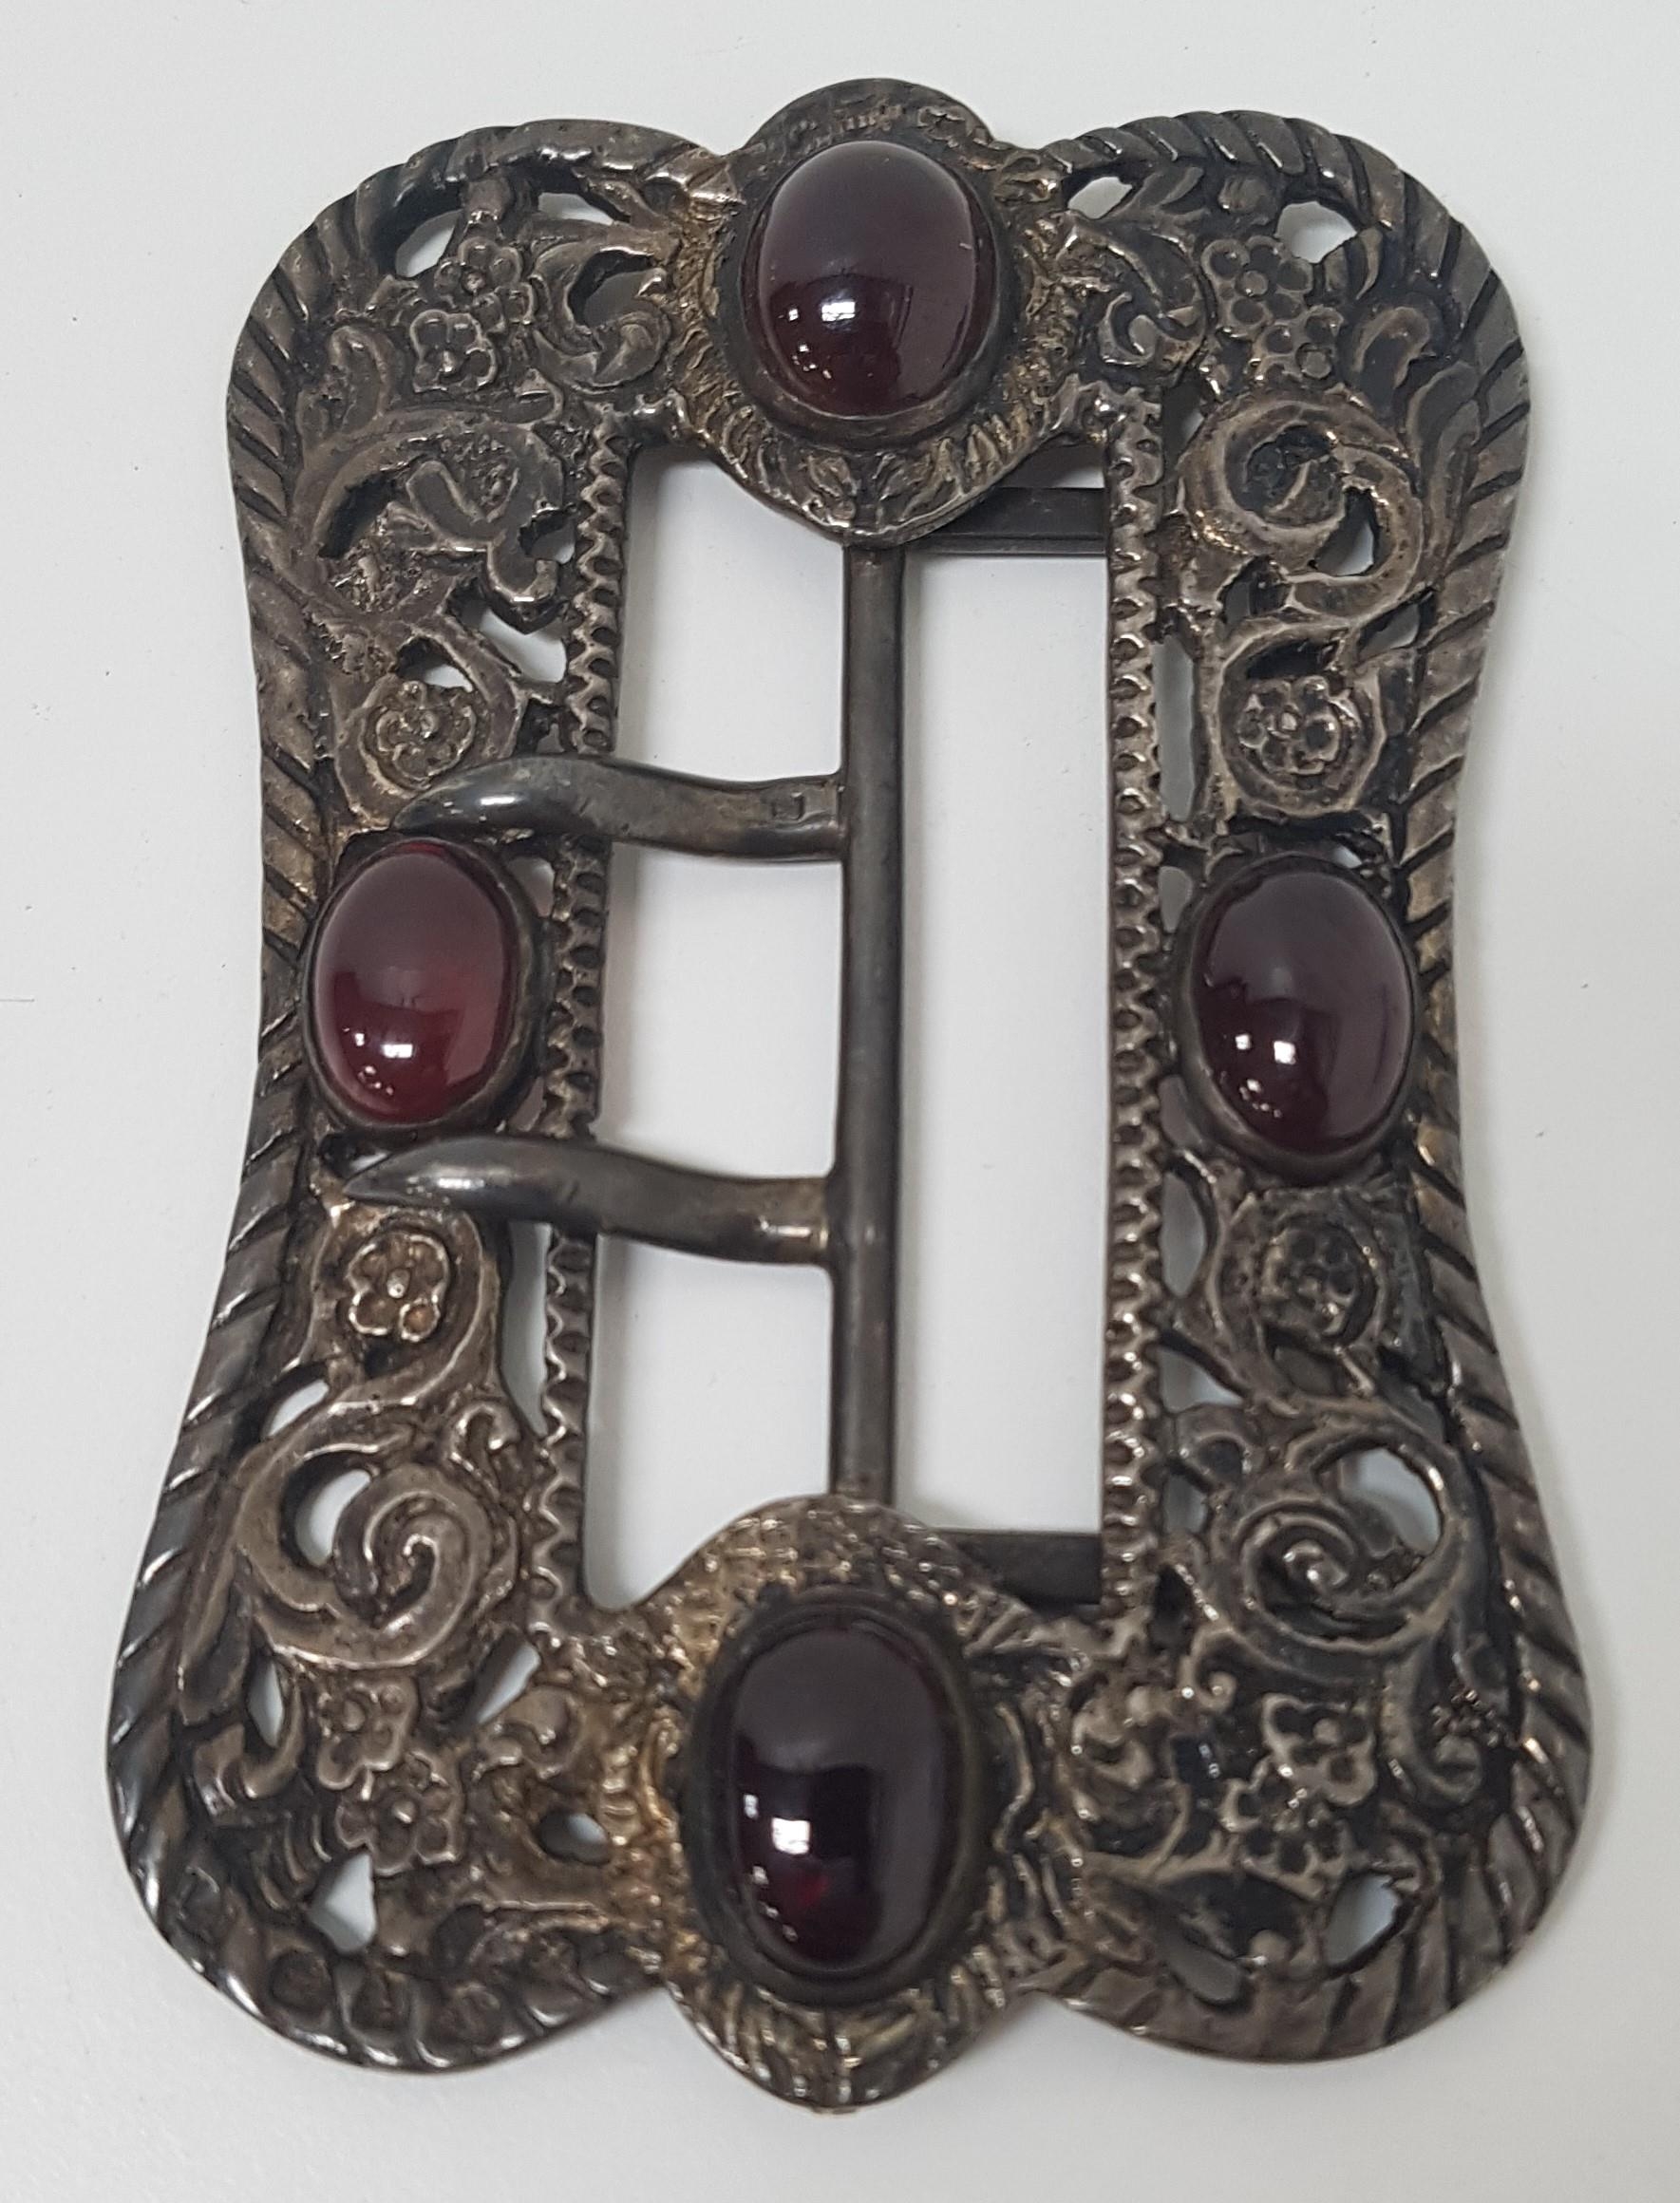 LATE VICTORIAN SILVER BELT BUCKLE with cabochon set stones to the decorative pierced and scrolled - Image 2 of 2